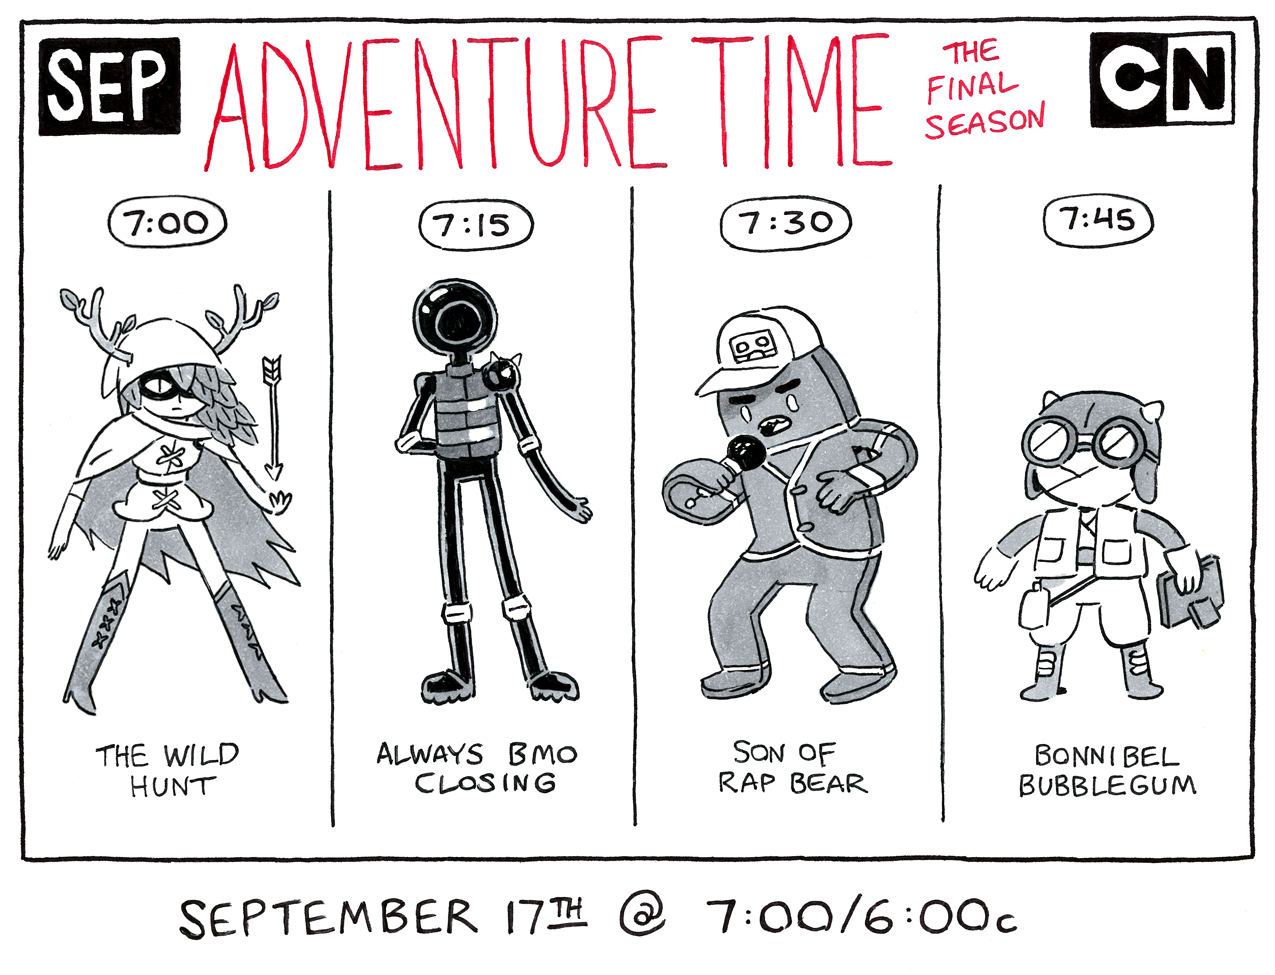 ADVENTURE TIME returns on Sunday, September 17th!Four NEW episodes premiering back-to-back